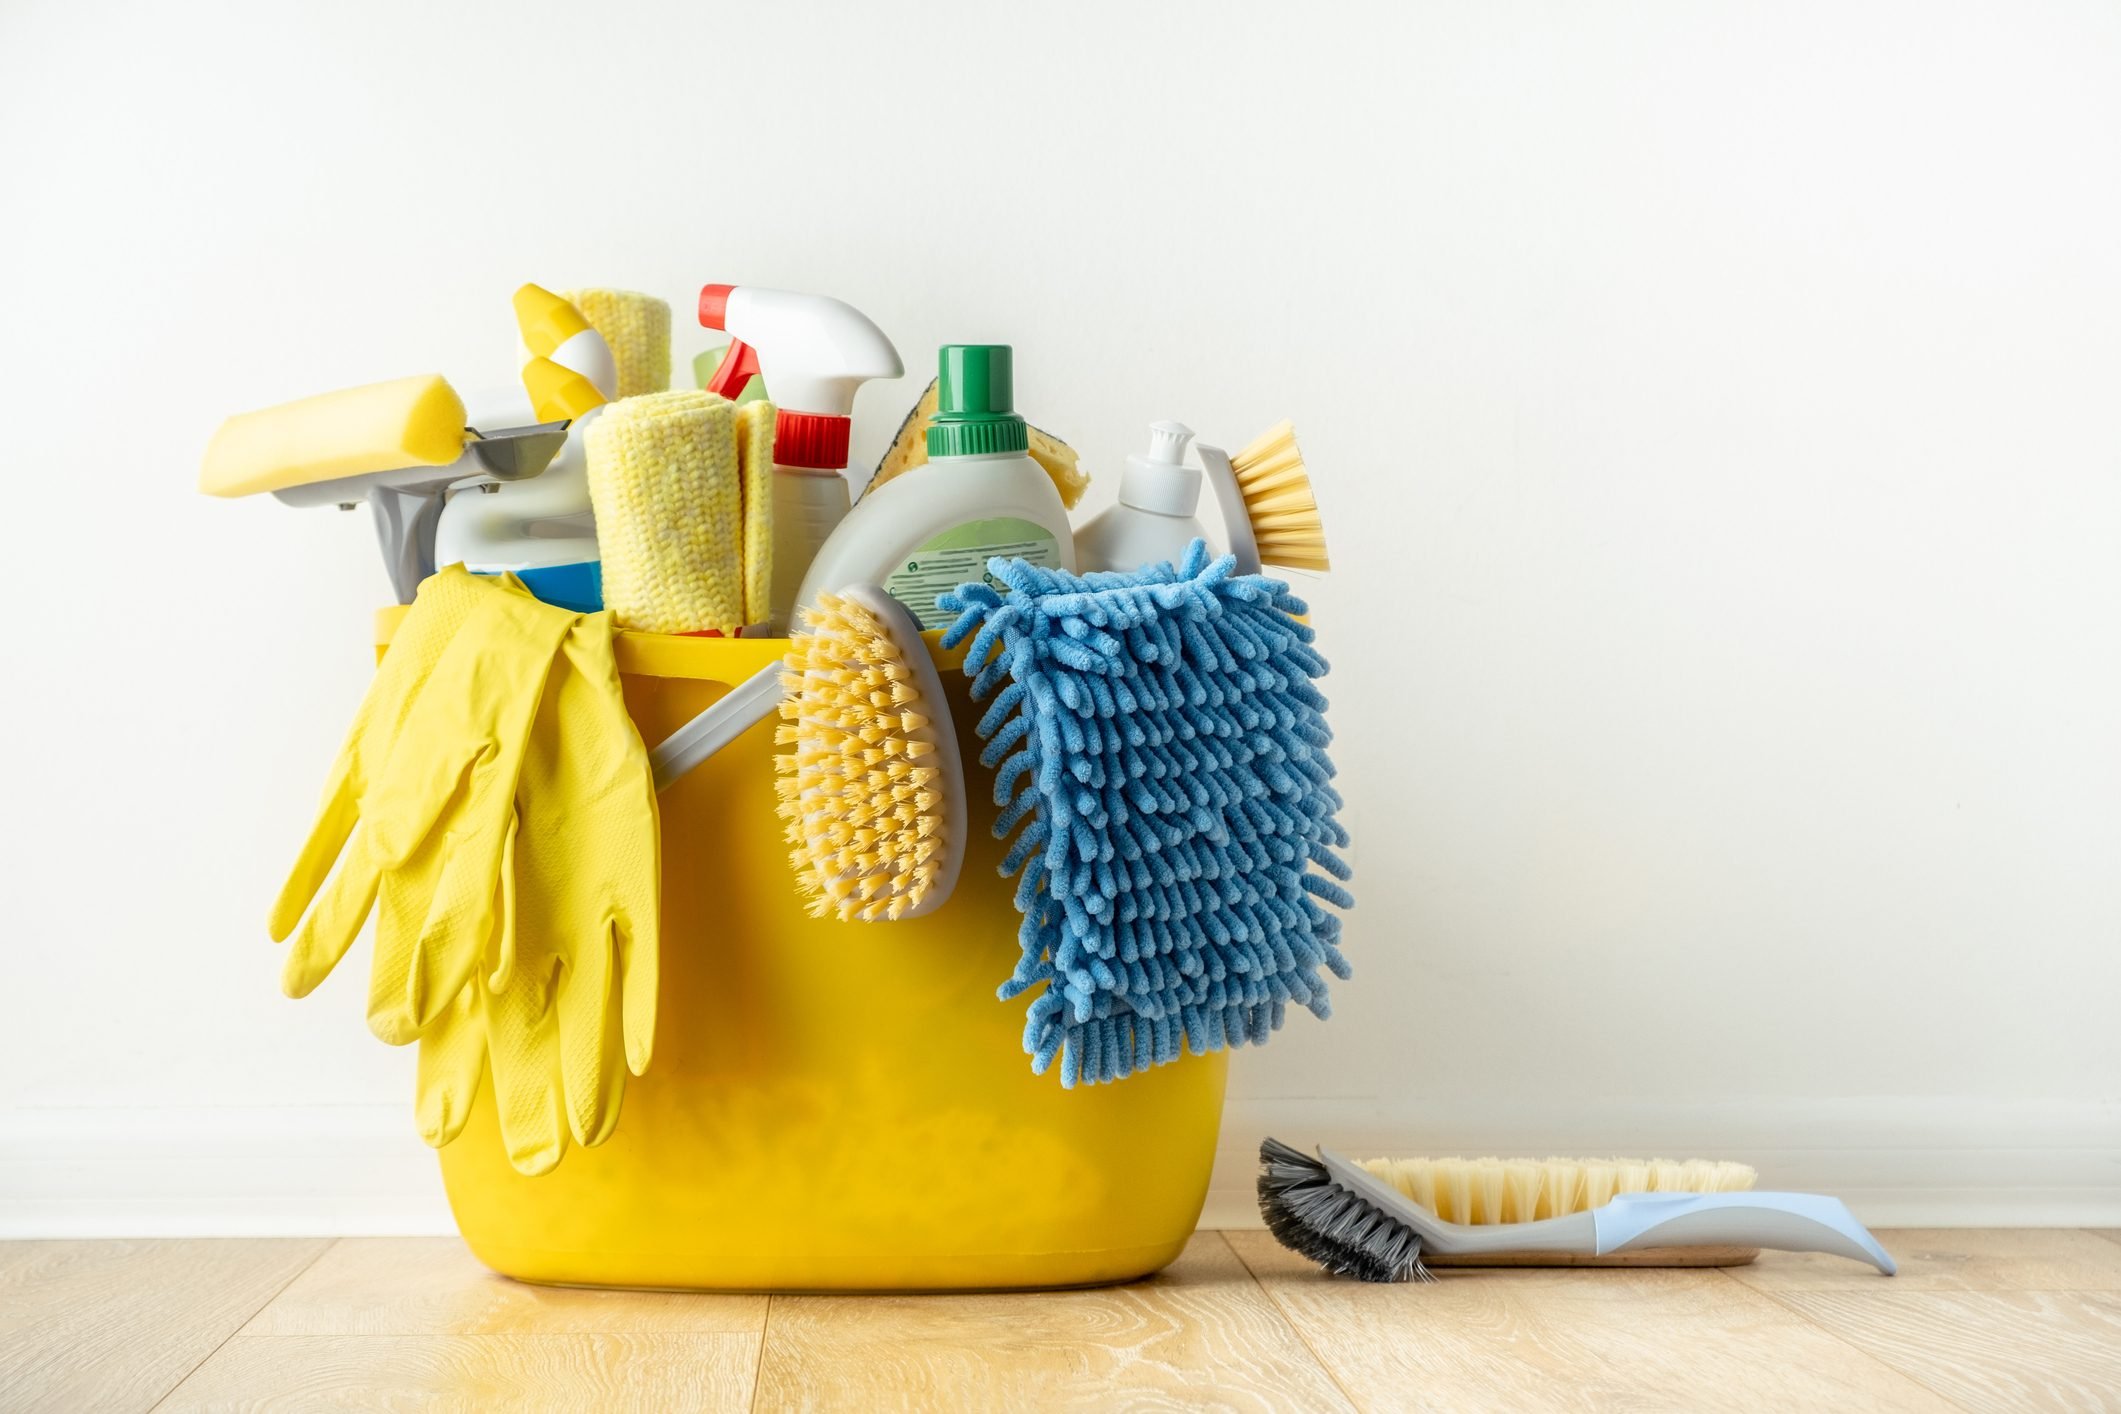 Spend on House Cleaning Products?